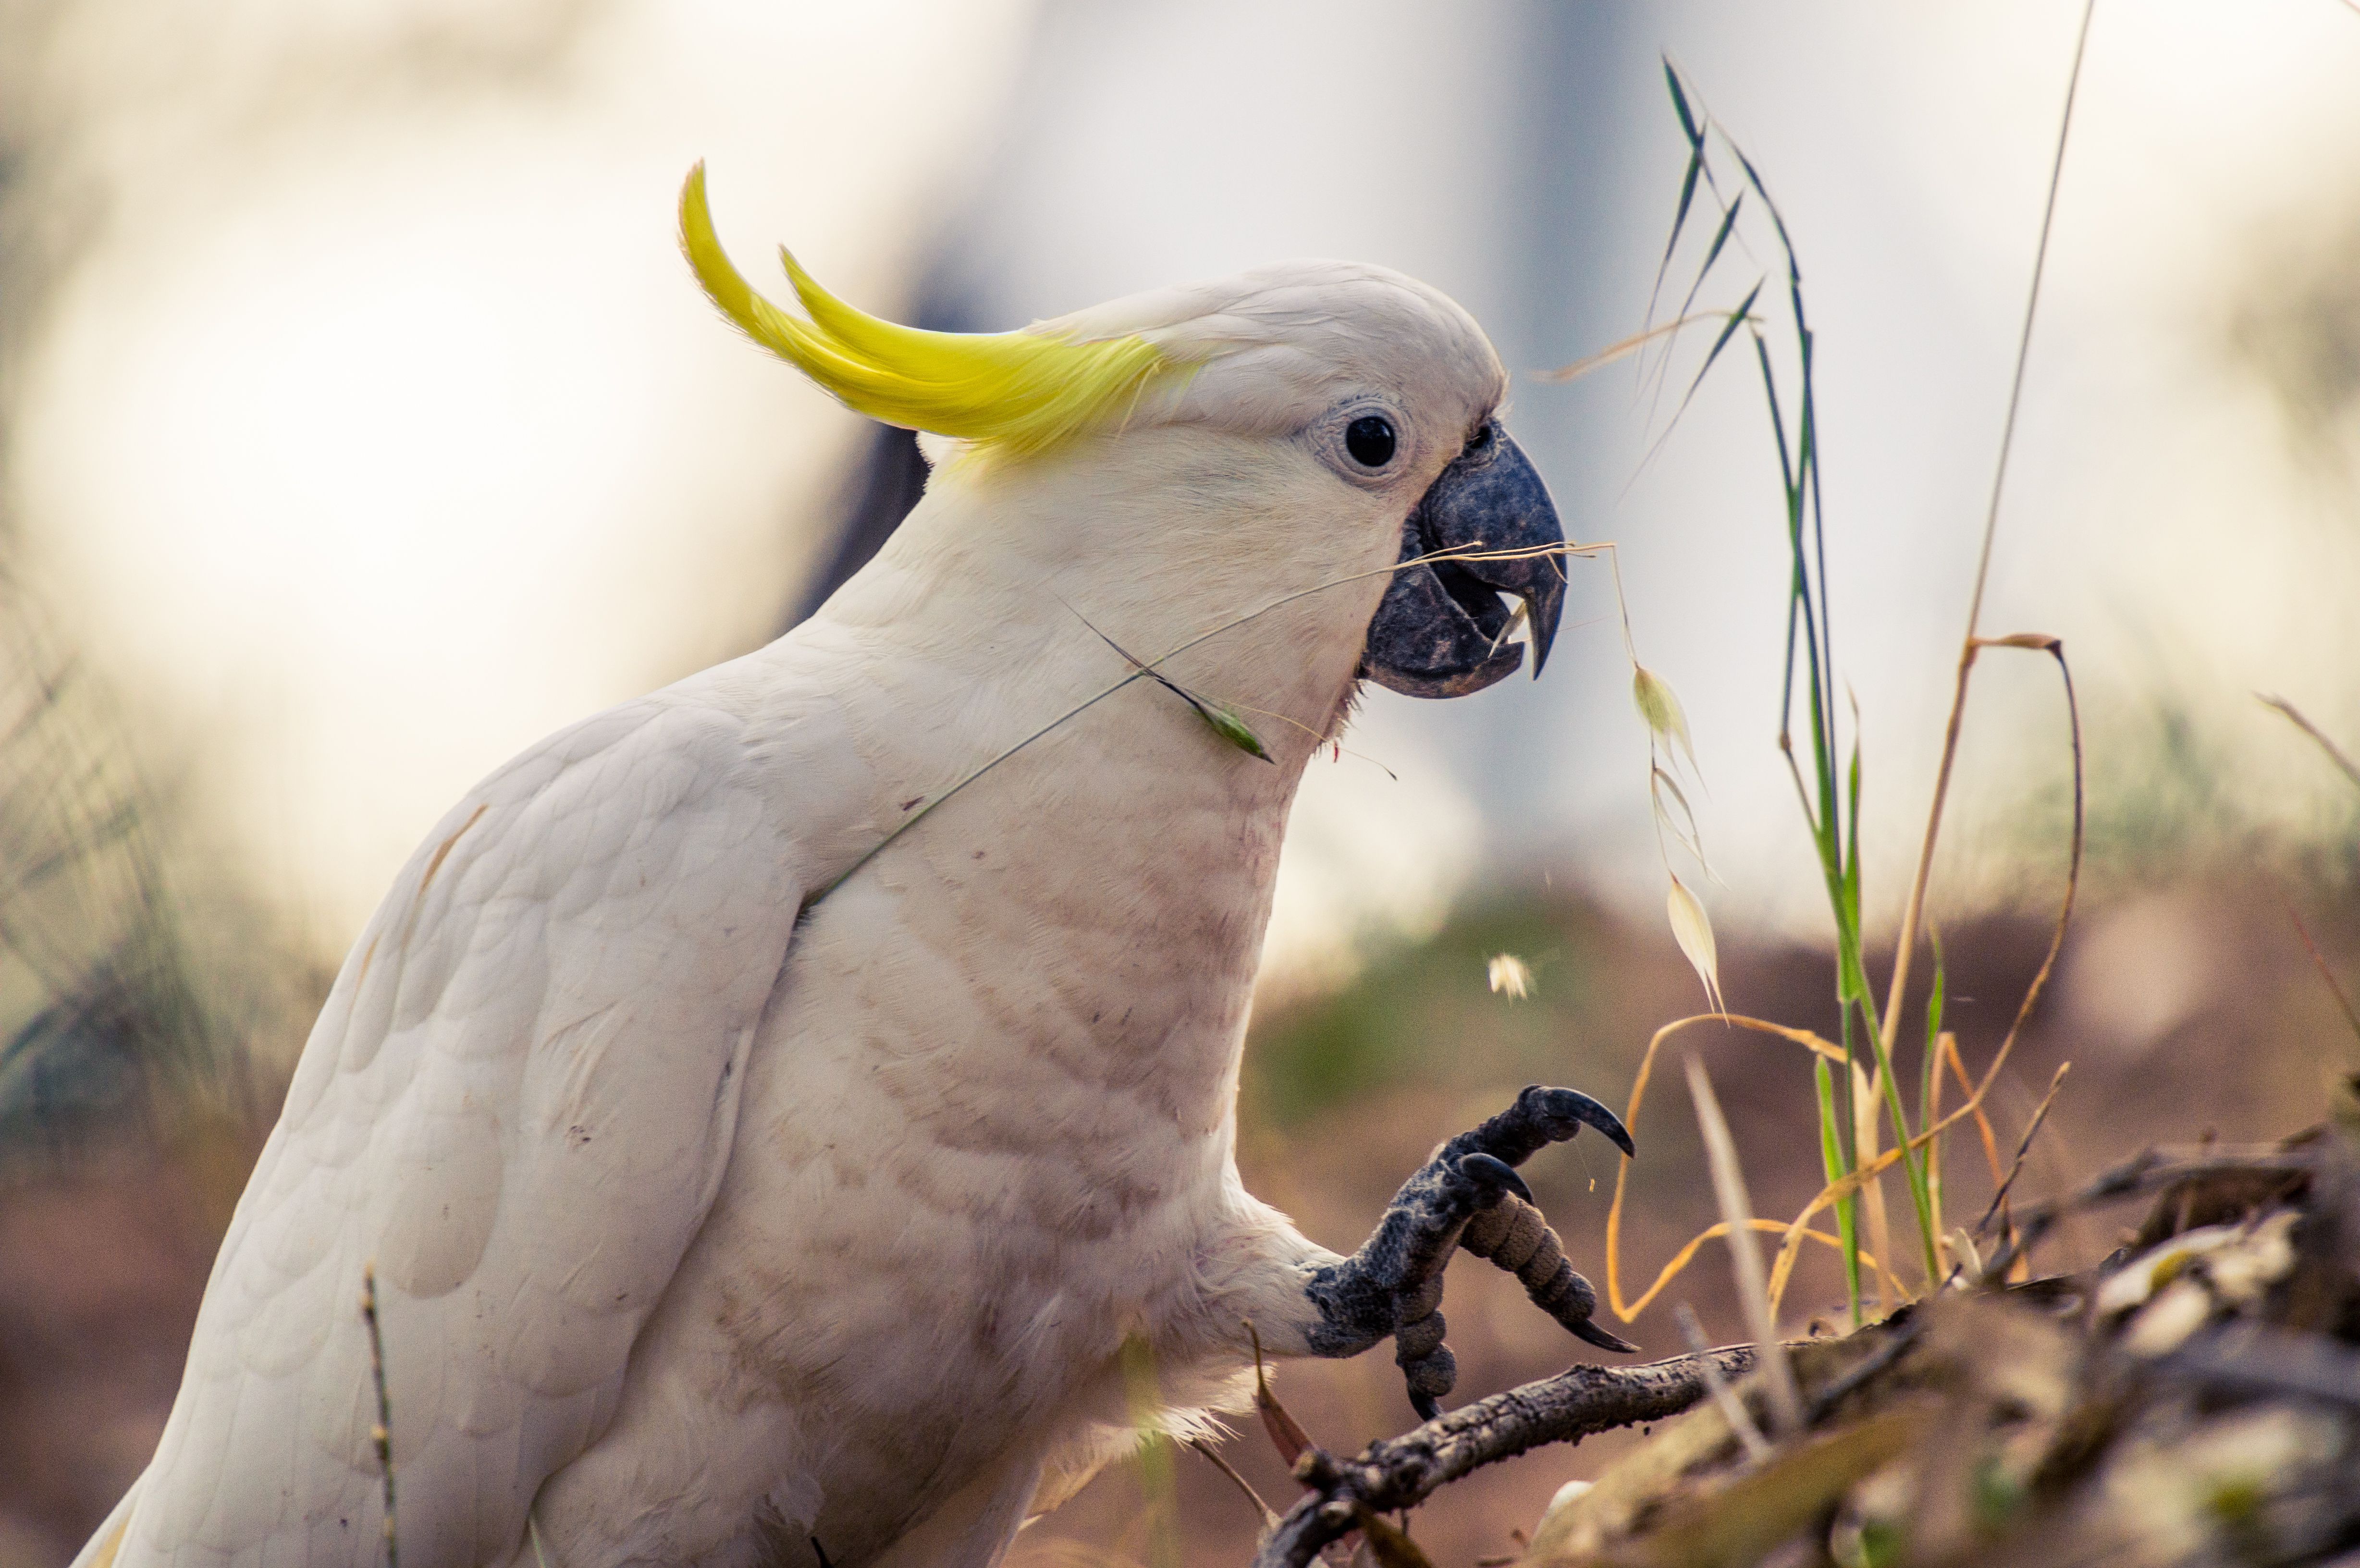 Sulphur-crested cockatoo walking in a field